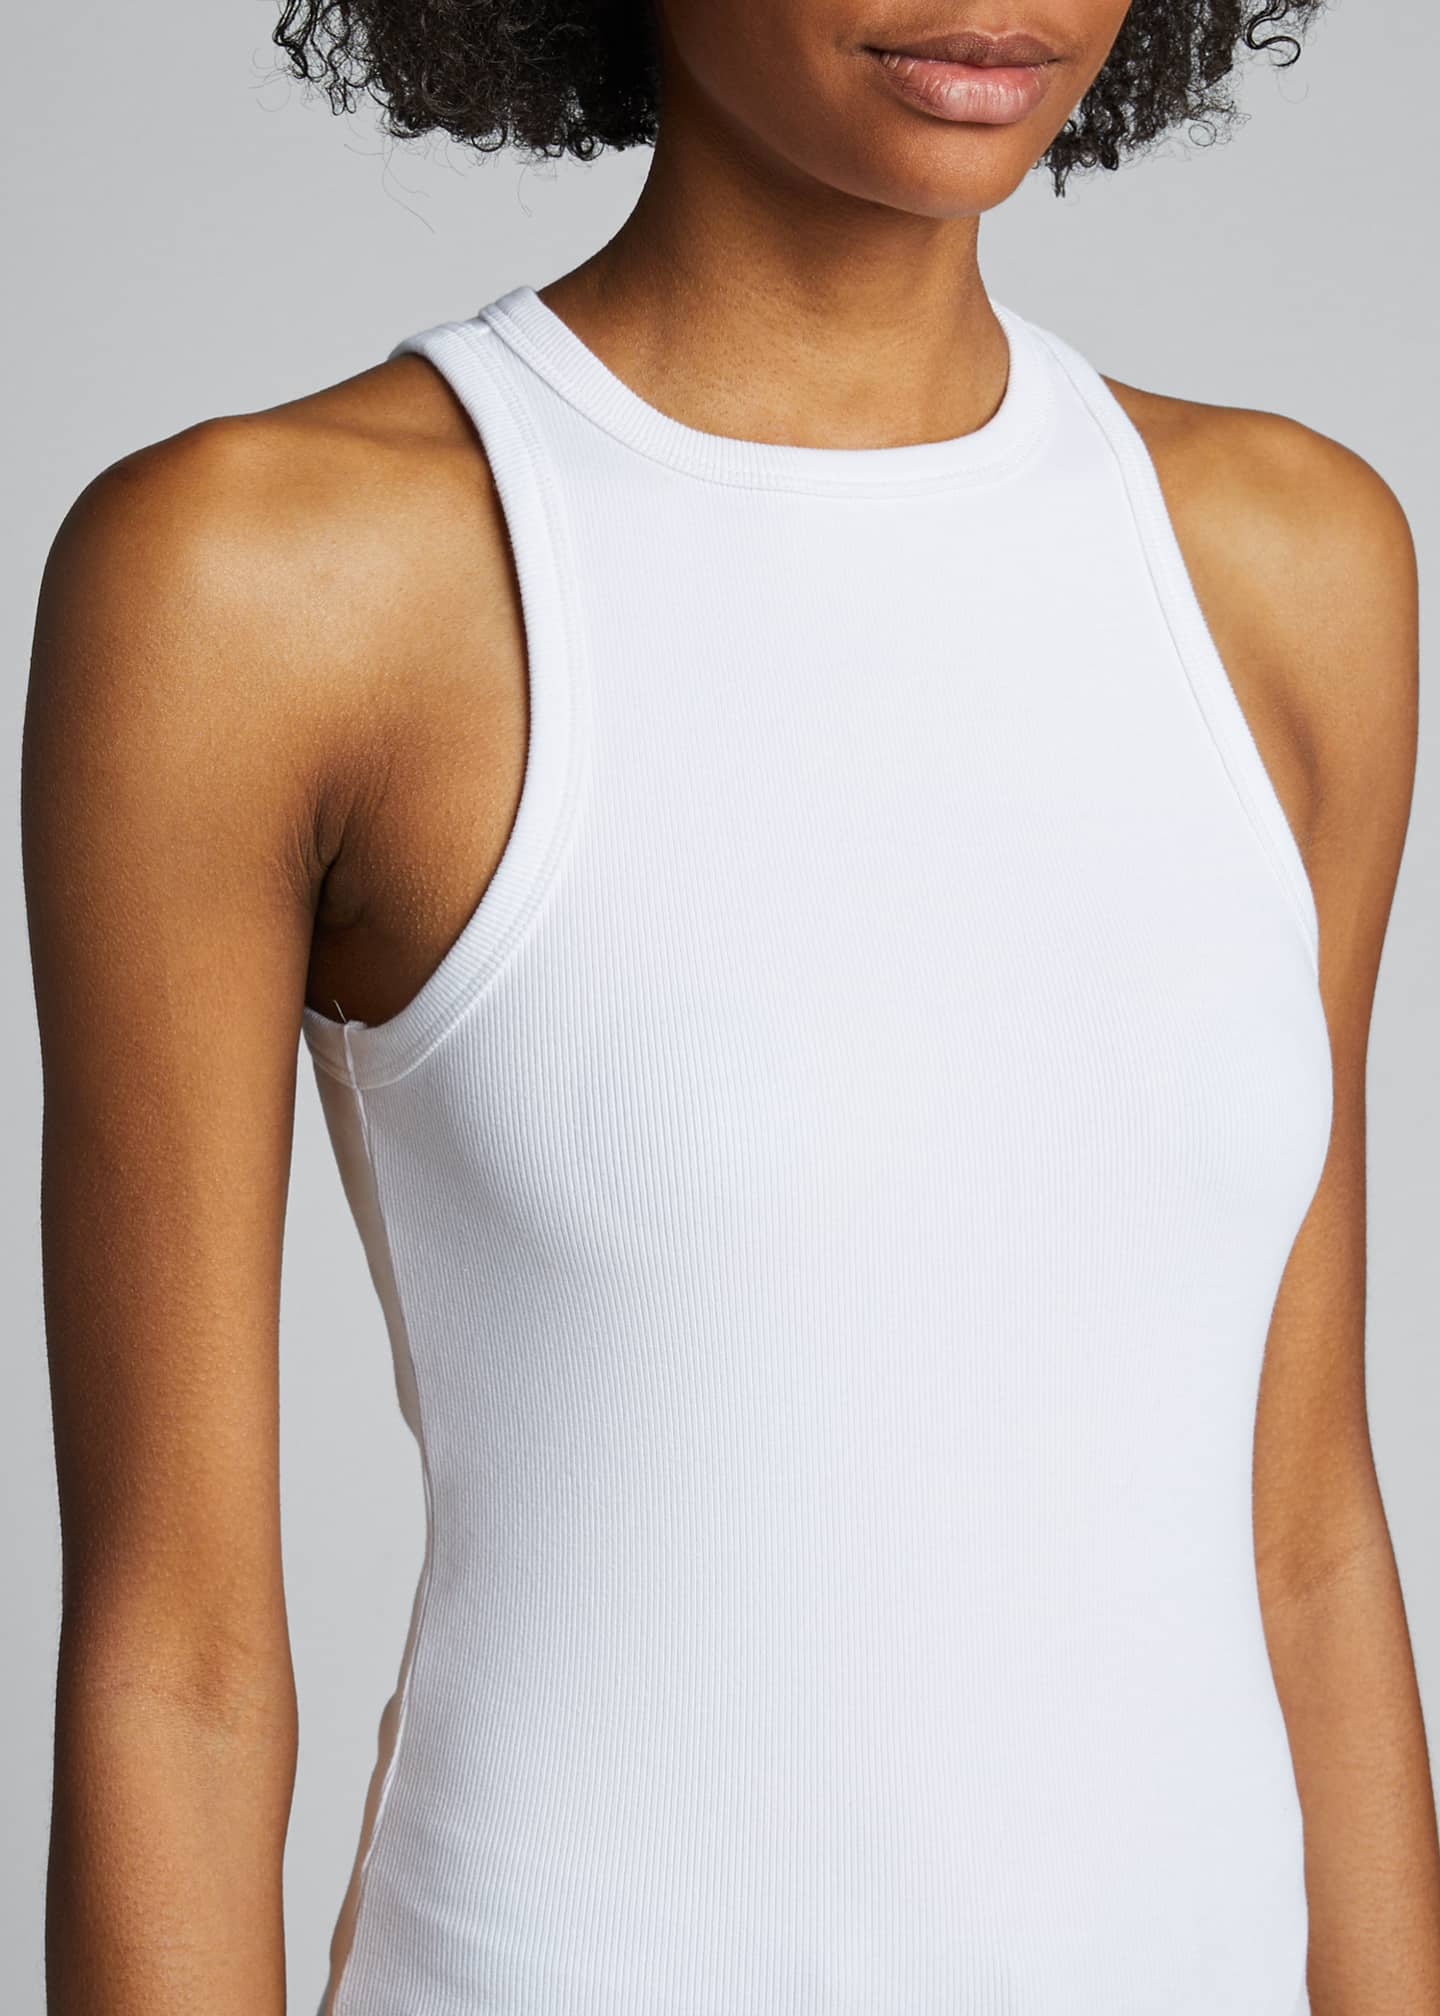 RIB TANK TOP IN WHITE BY AGOLDE